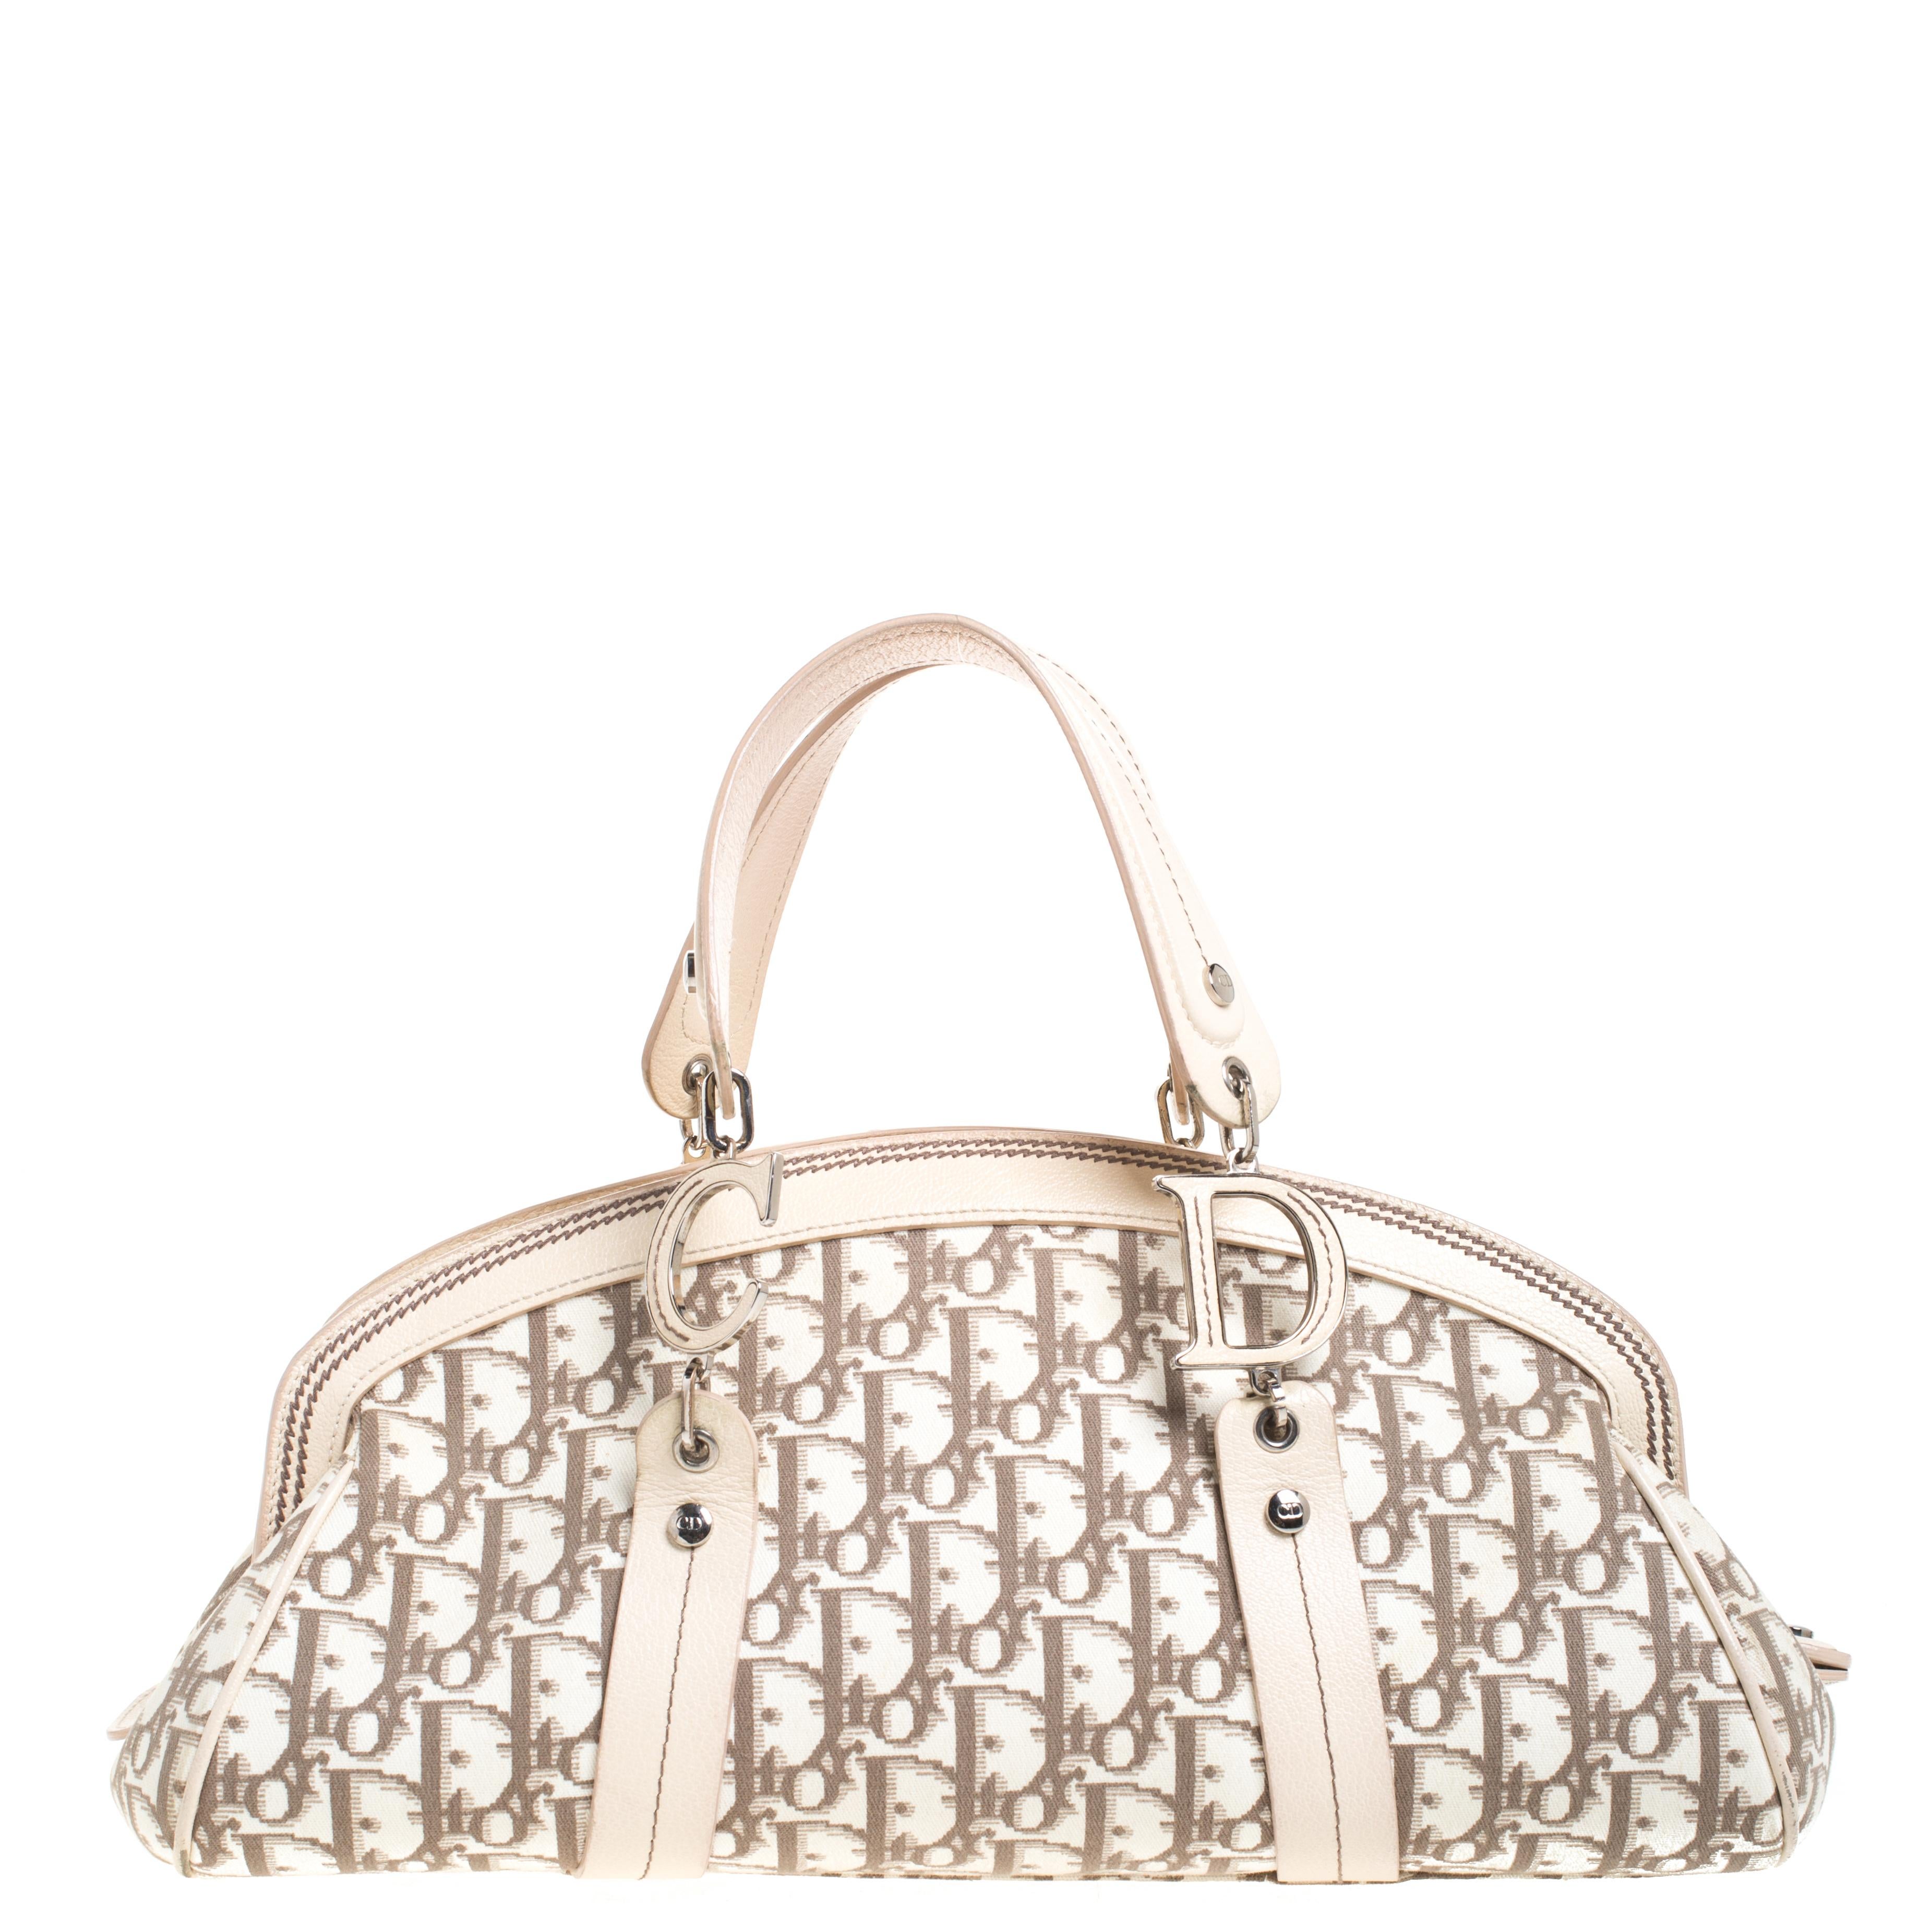 Start the summer season in style when you carry this adorable bag by Dior. It is crafted from signature Diorissimo fabric and leather trims. This satchel is accented with colorful floral embroidery on the front, silver-tone hardware and short